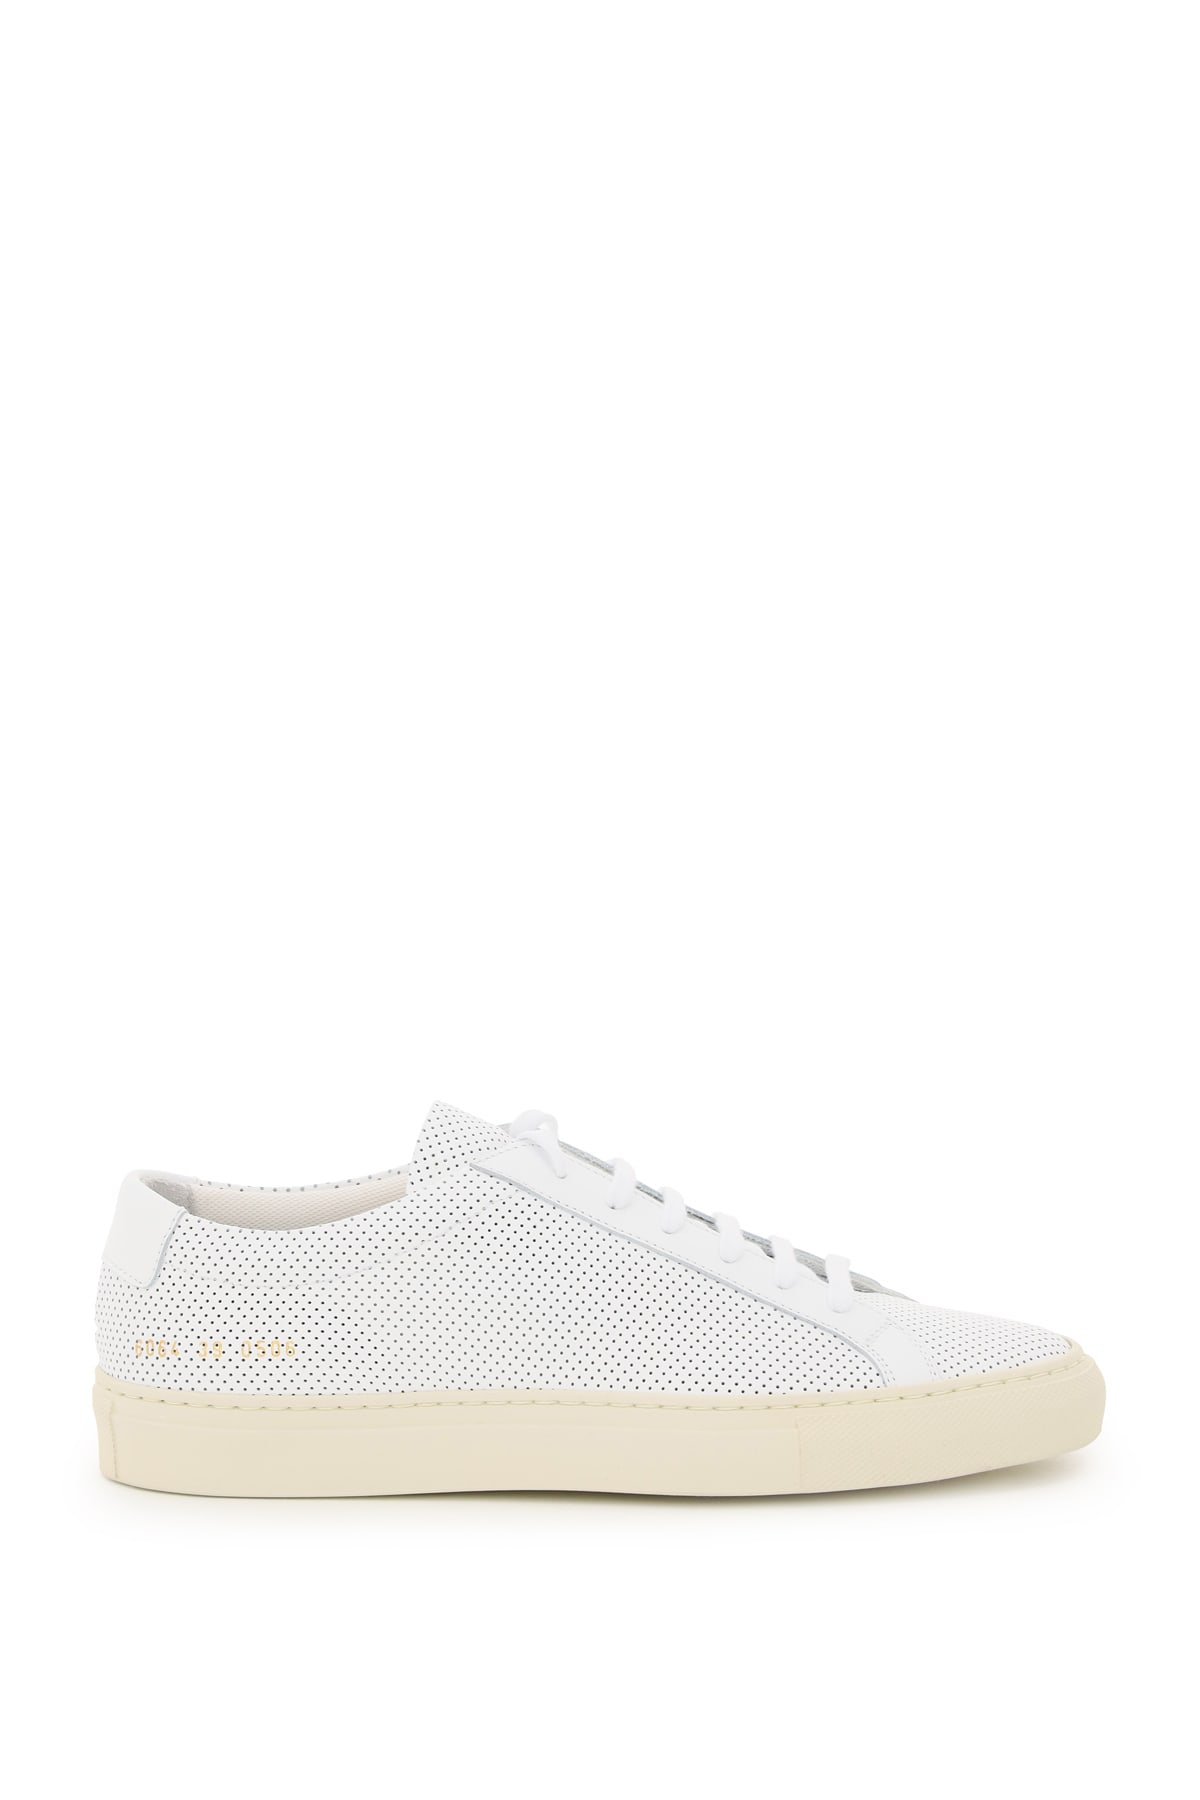 Common Projects Achilles Low Perforated Leather Sneaker